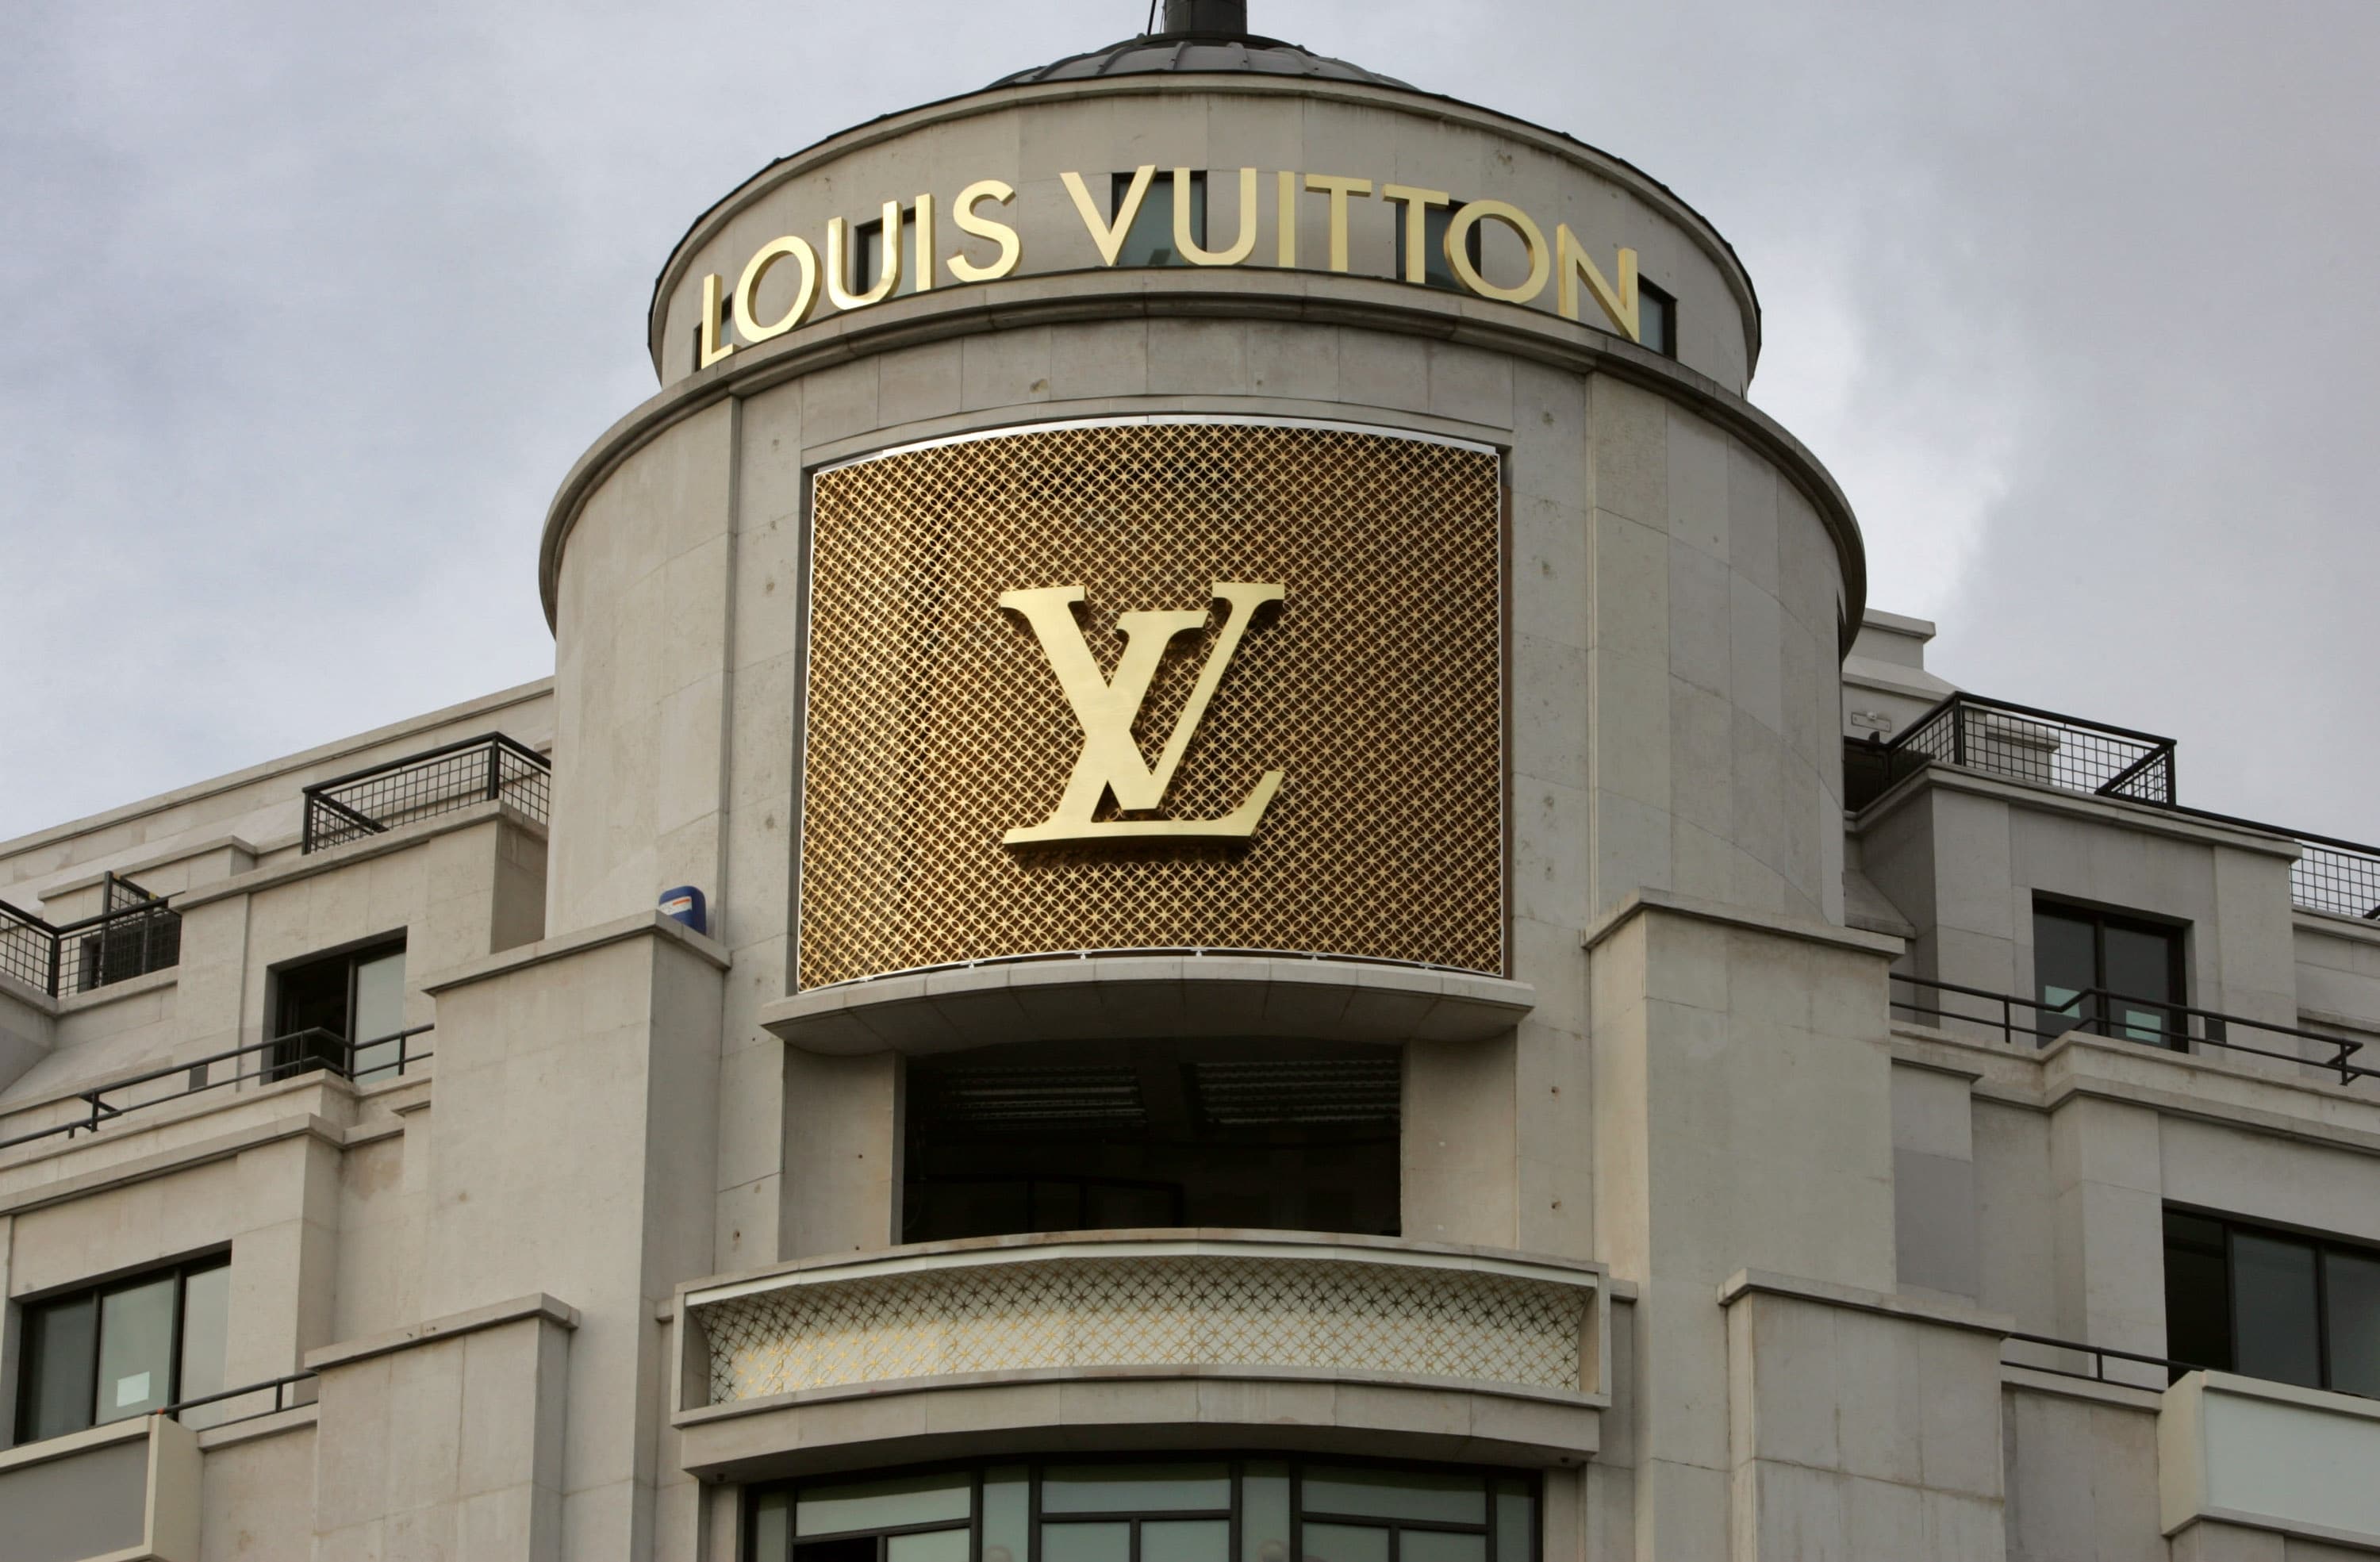 Stock market: The CAC 40 continues to rise, driven by the LVMH